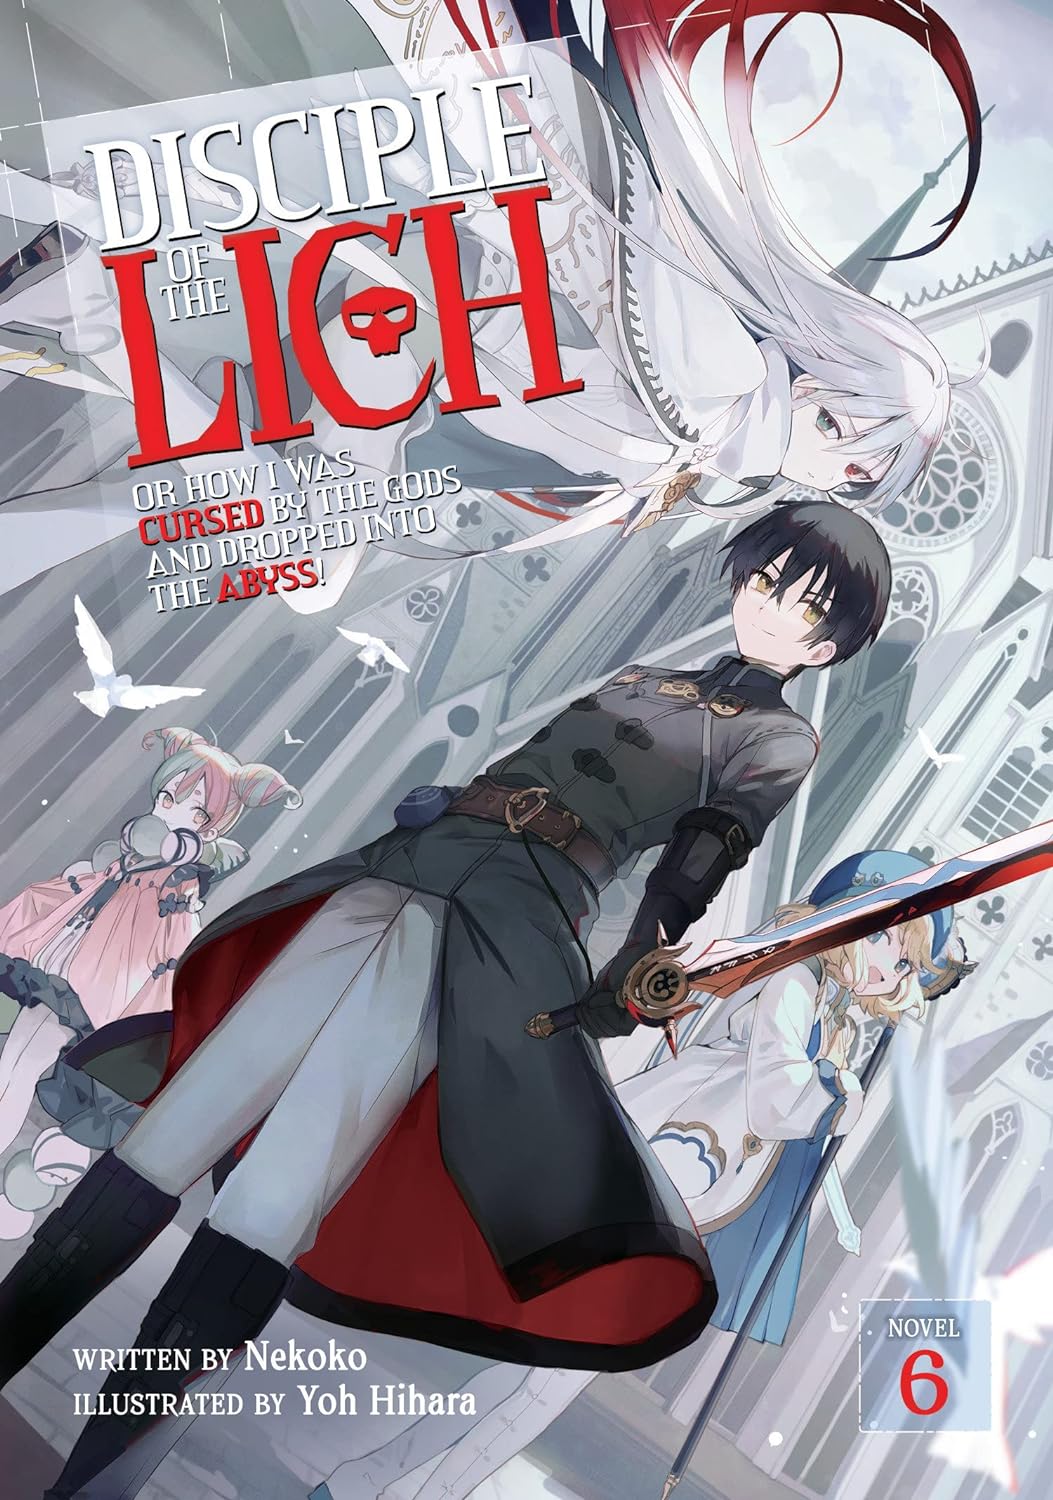 Disciple of the Lich: Or How I Was Cursed by the Gods and Dropped Into the Abyss! (Light Novel) Vol. 06